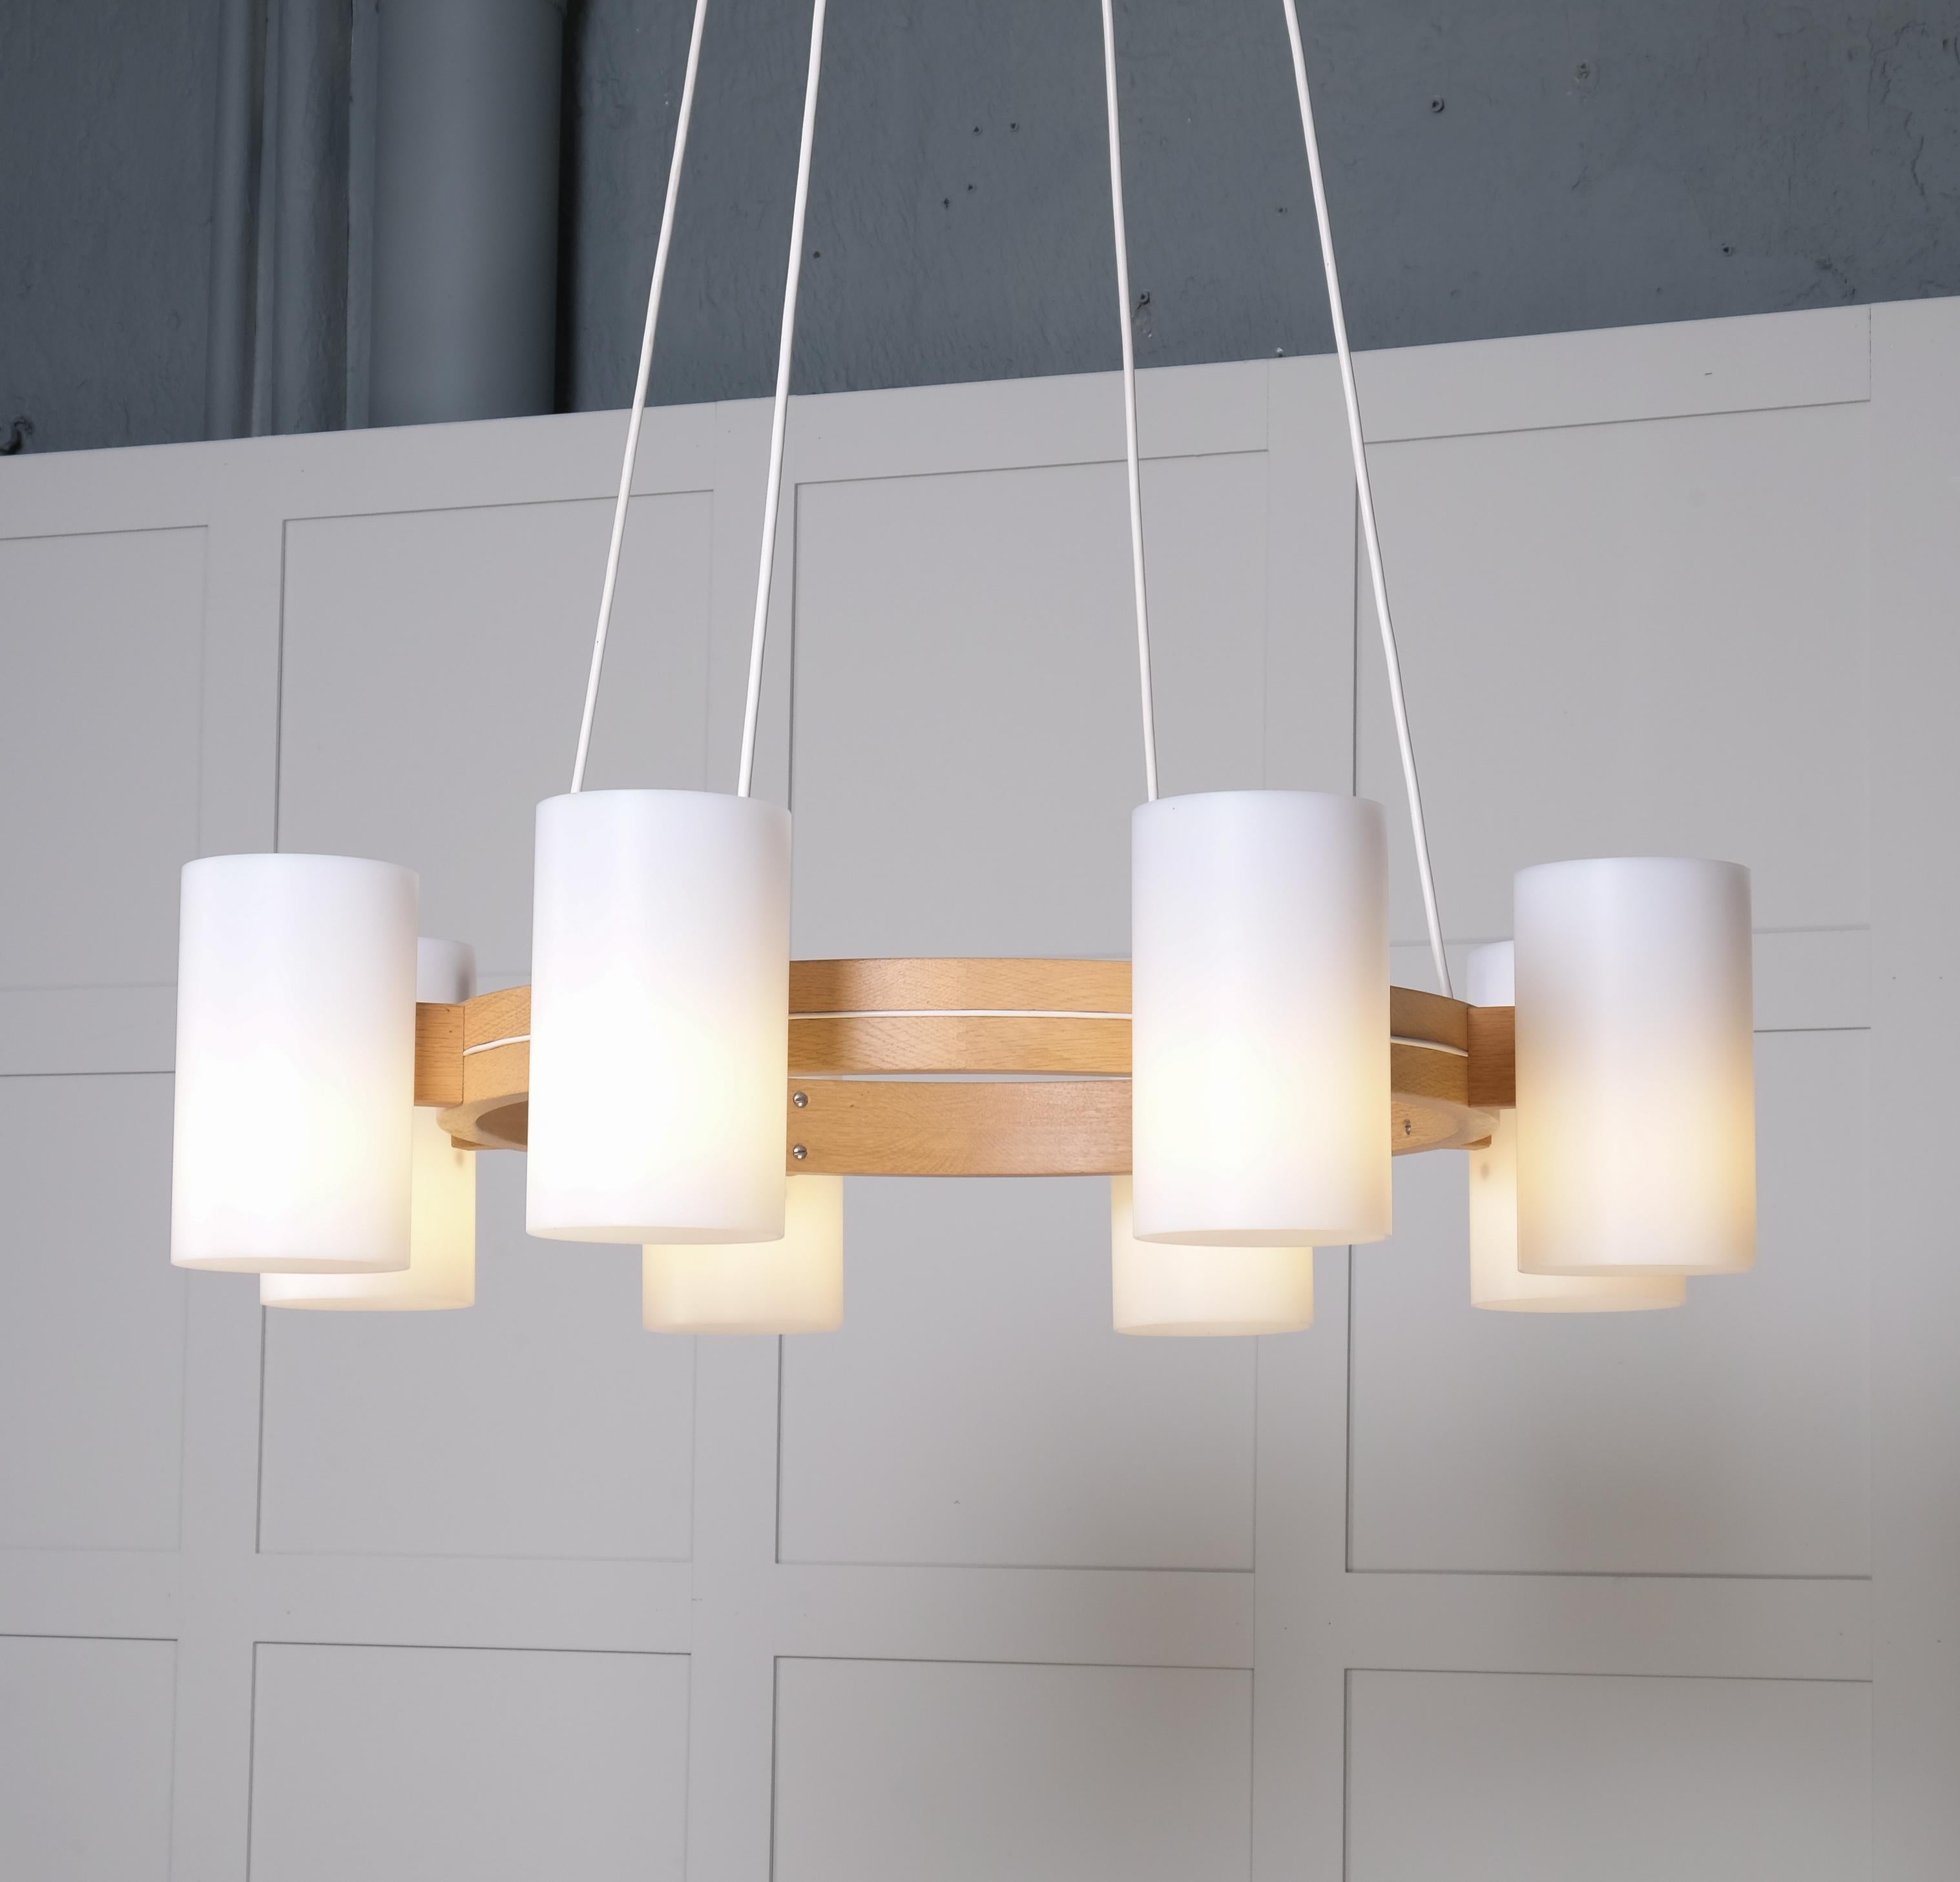 Set of 6 Chandeliers by Uno & Östen Kristiansson for Luxus, 1960s For Sale 1